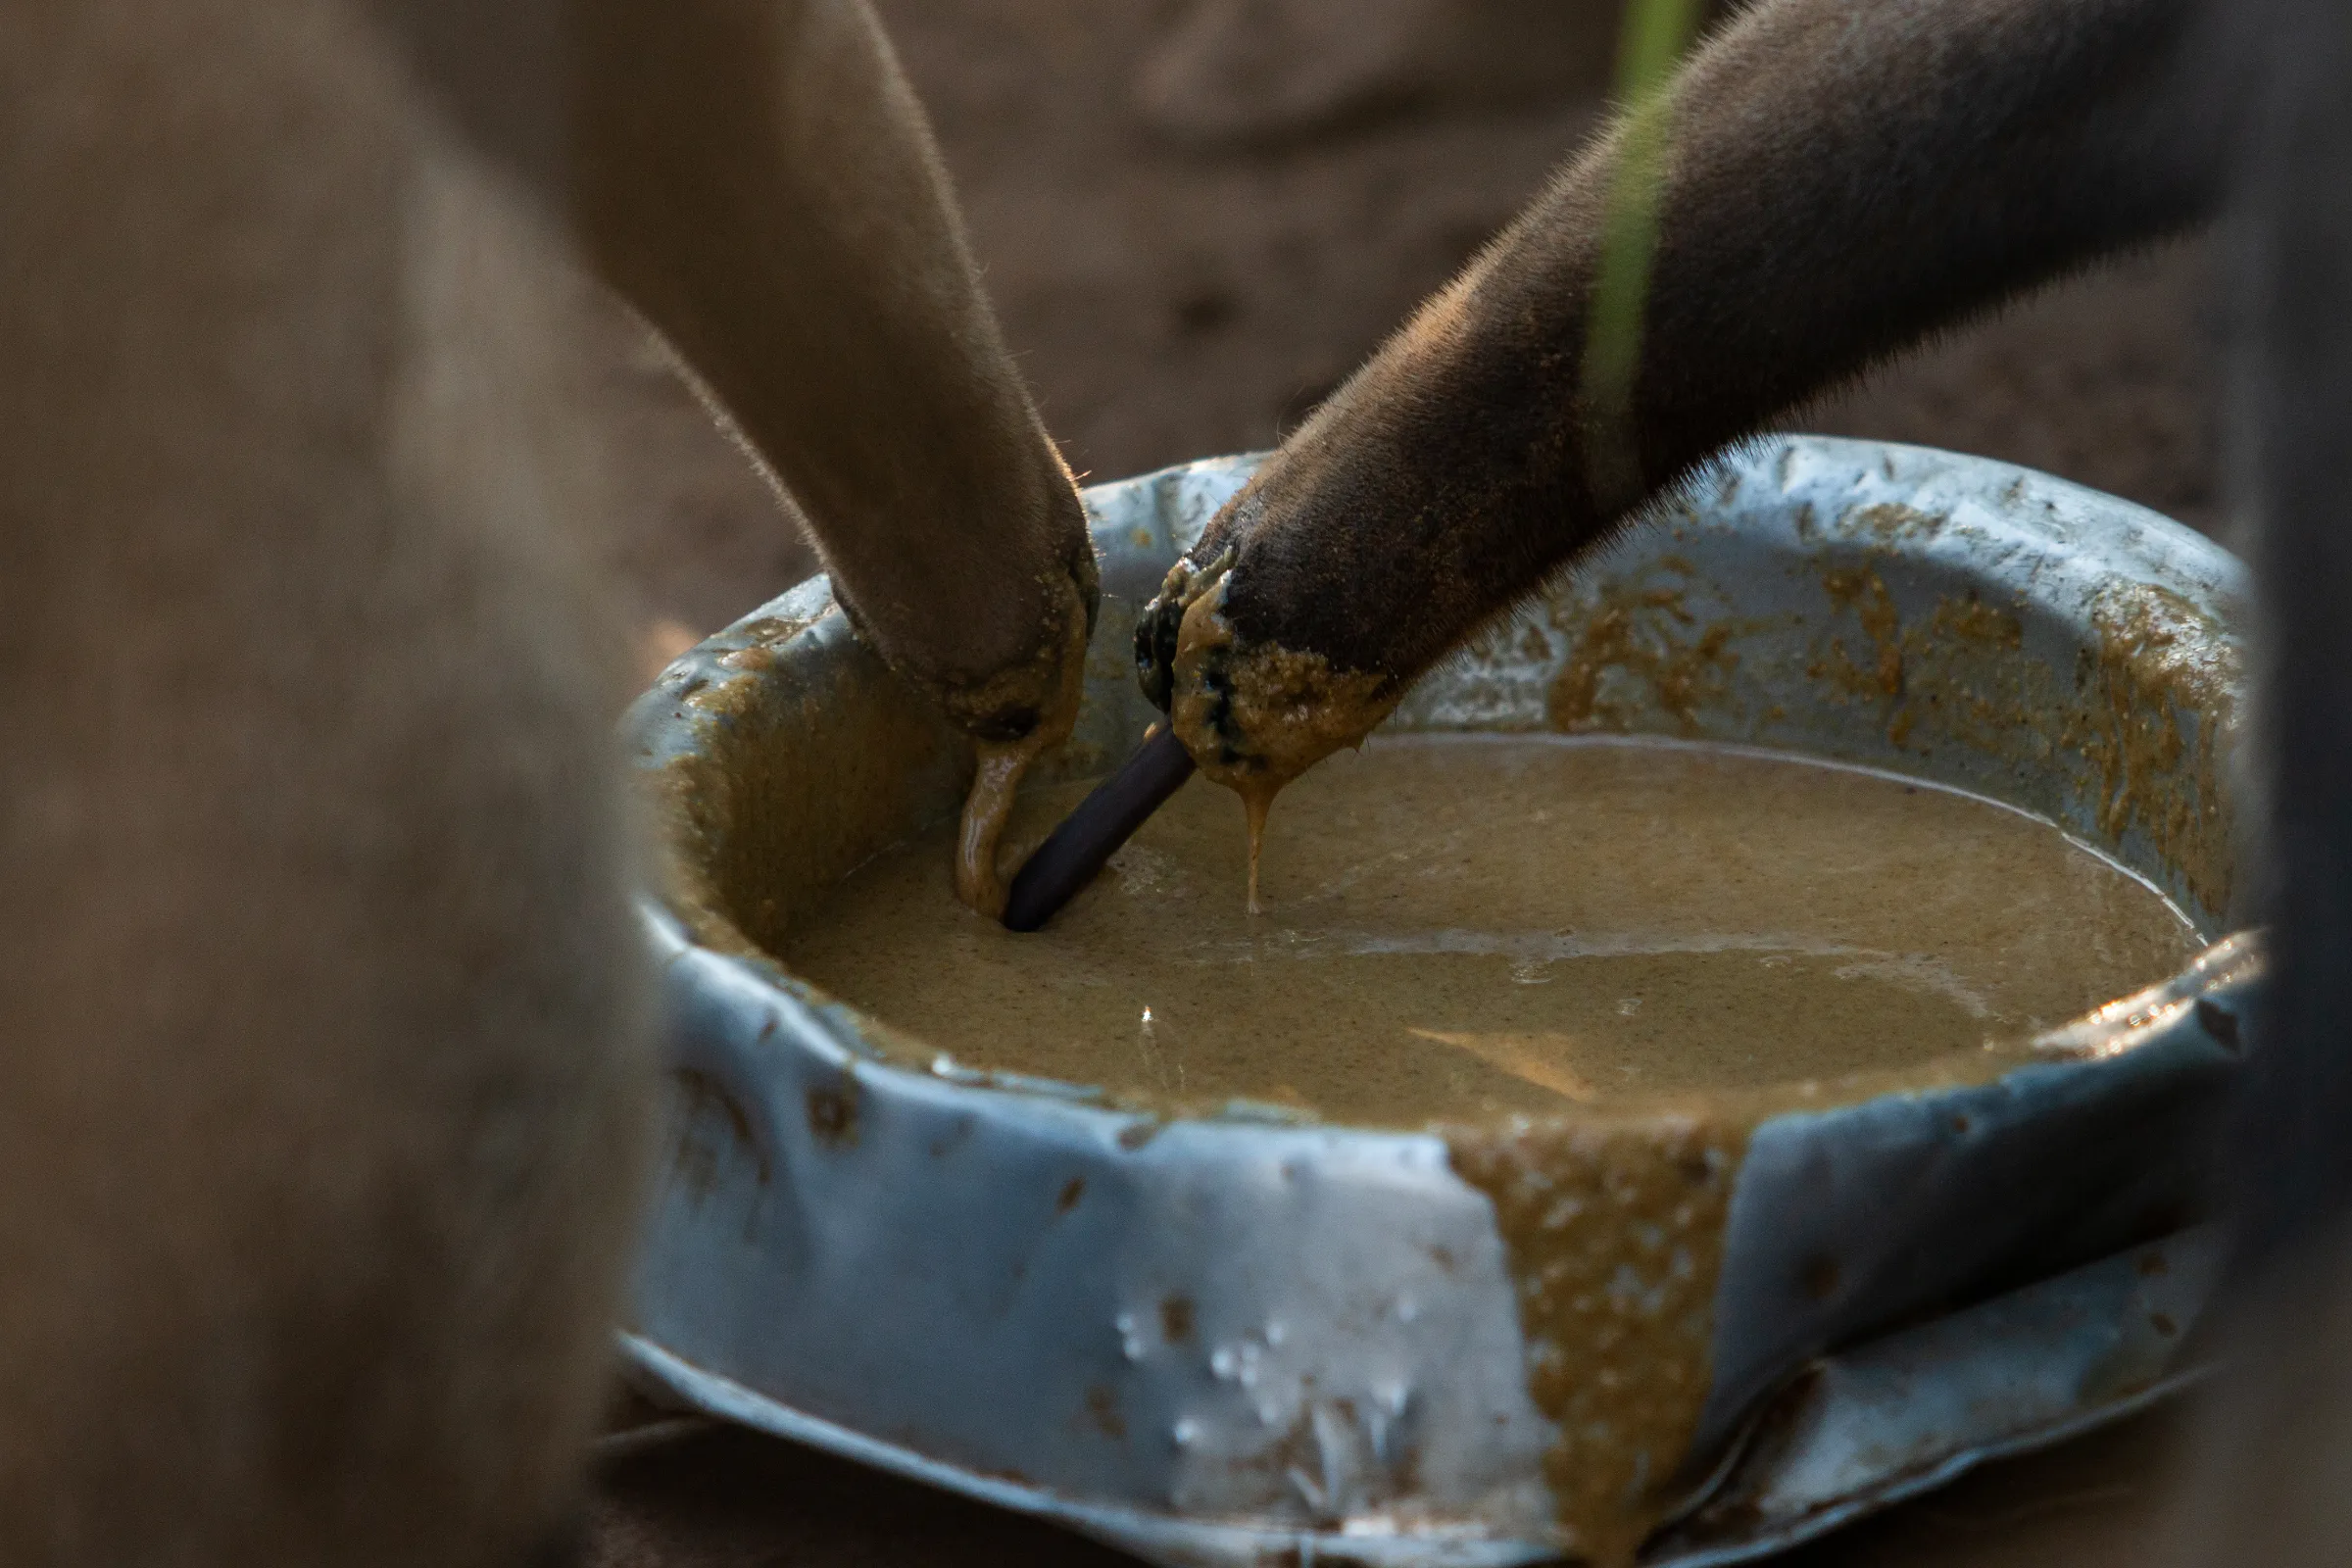 Giant anteaters from the Orphans of Fire project eating feed made out of soy, eggs and cow plasma protein in rural Aquidauana, Mato Grosso do Sul state, Brazil, September, 15, 2022. Thomson Reuters Foundation/Henrique Kawaminami